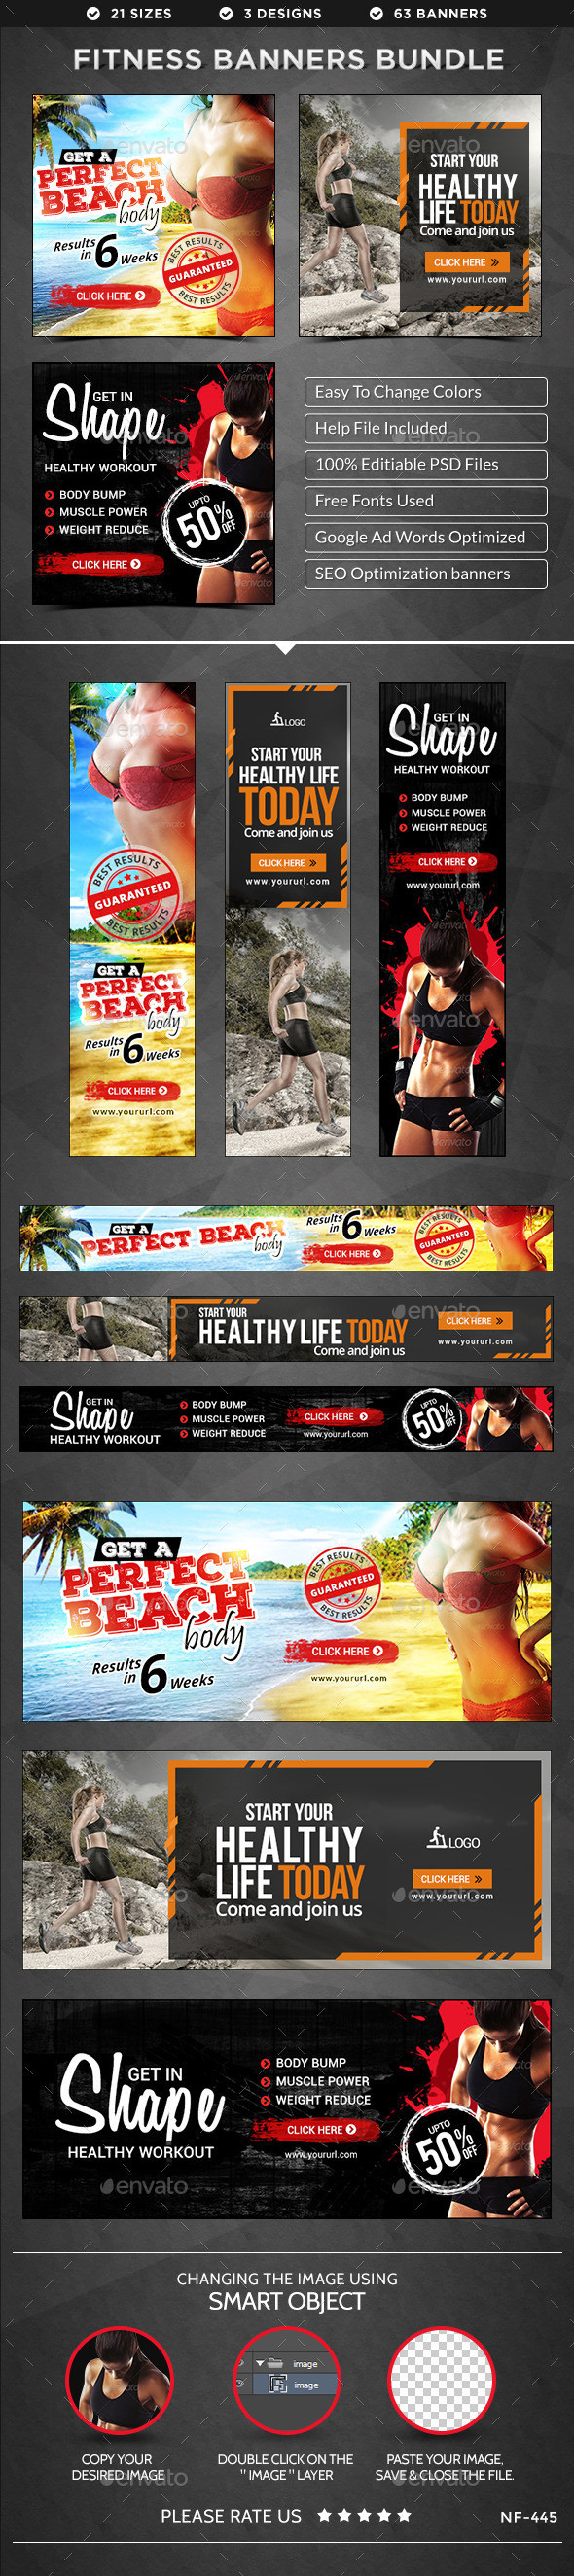 Nf 445 fitness 20banners 20bundle preview